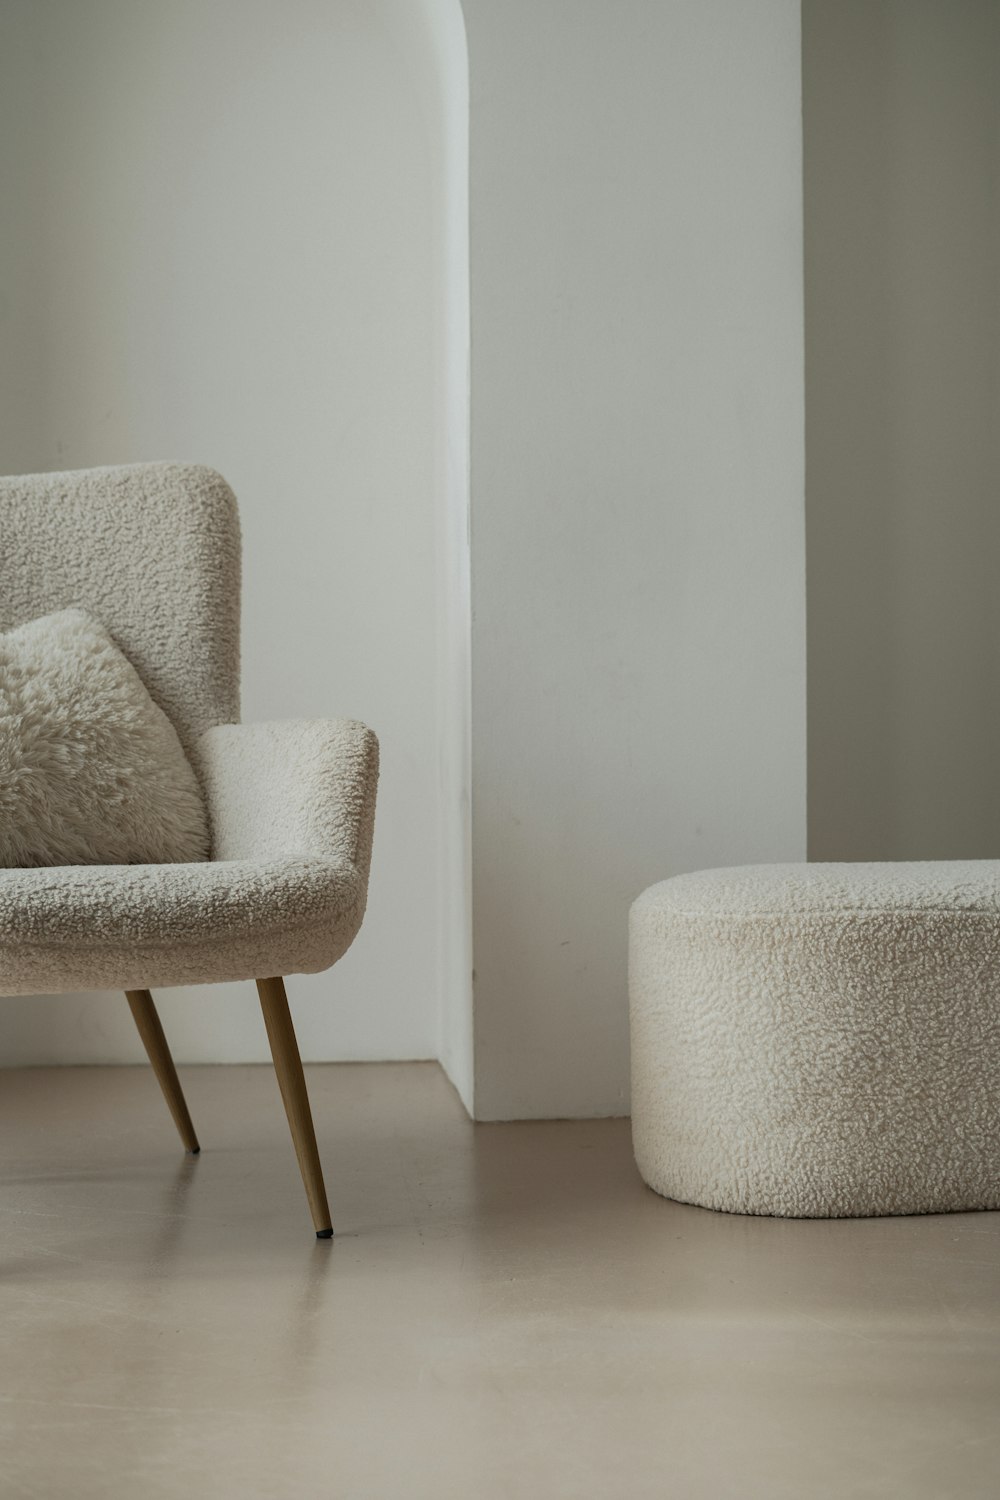 a white chair and ottoman in a room